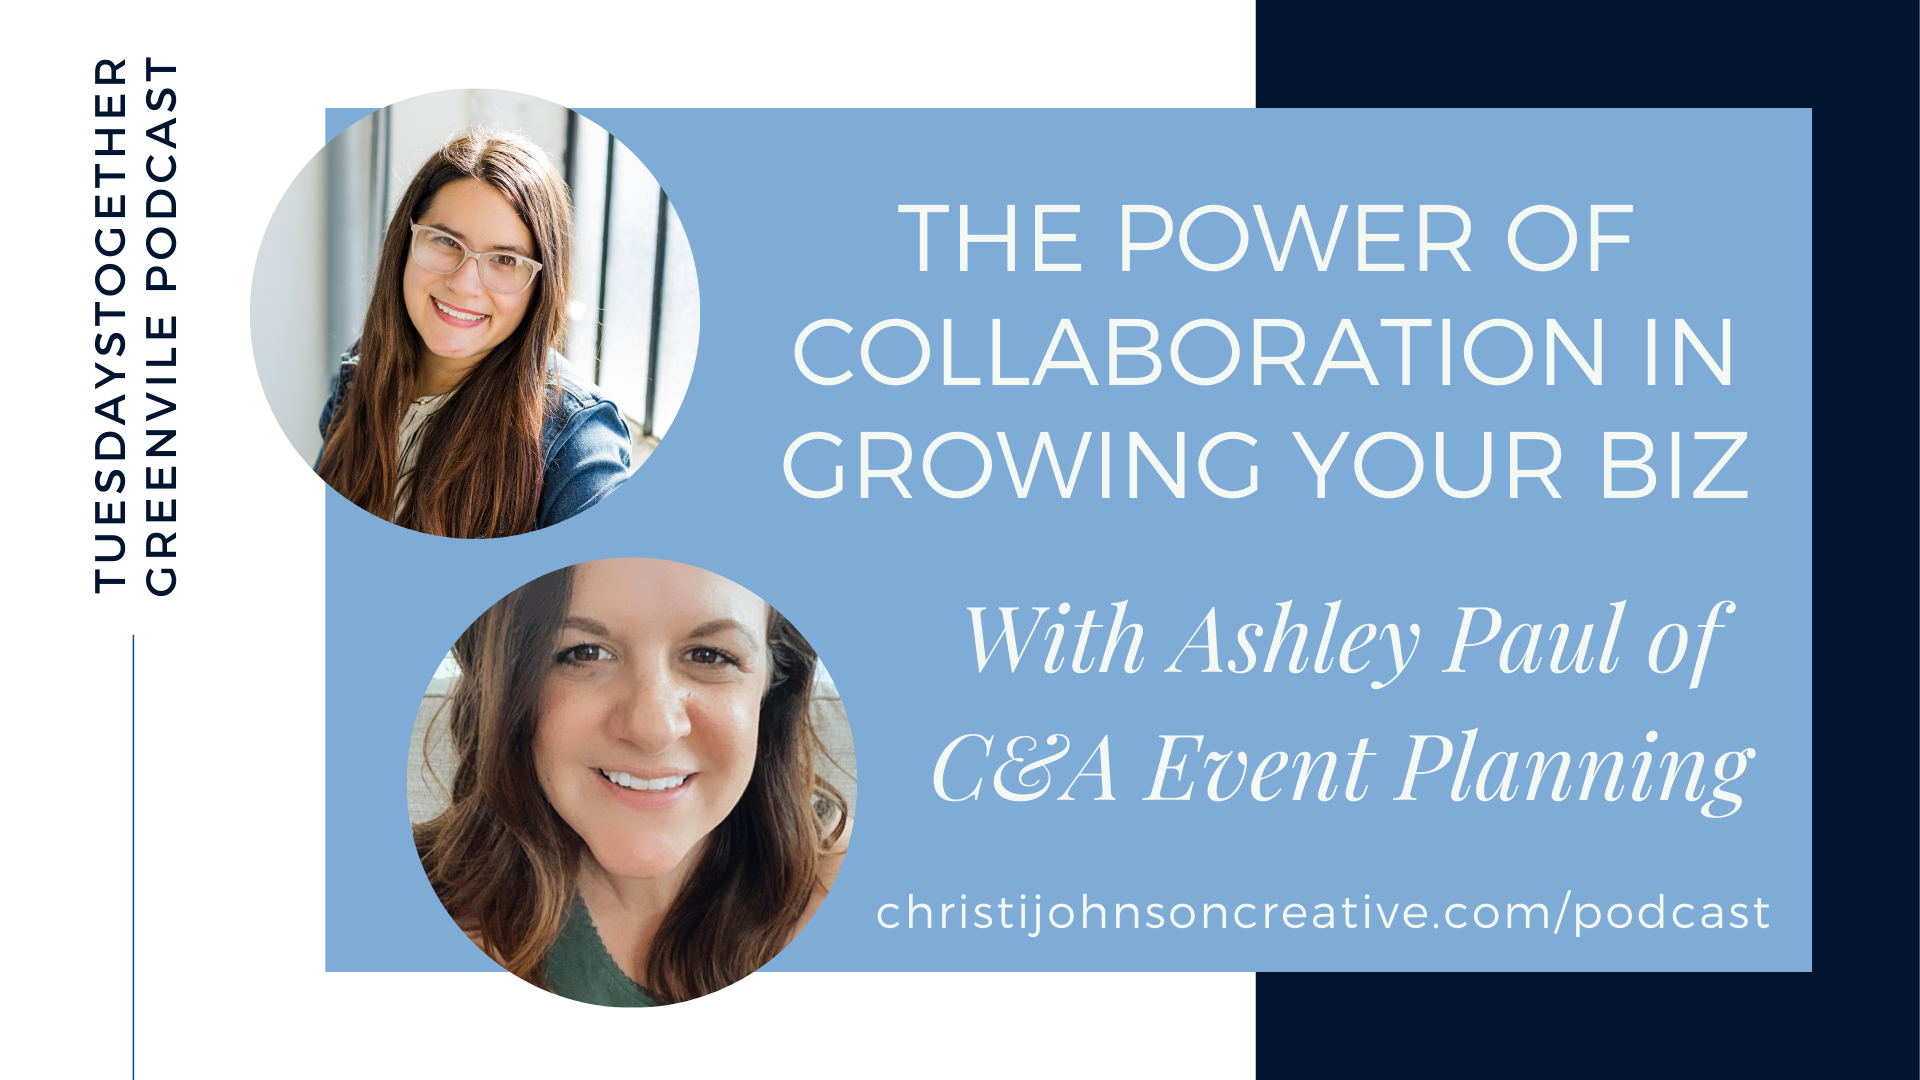 The Power of Collaboration in Growing Your Business - Photos of Ashley Paul and Christi Johnson for the title card with a blue and white background